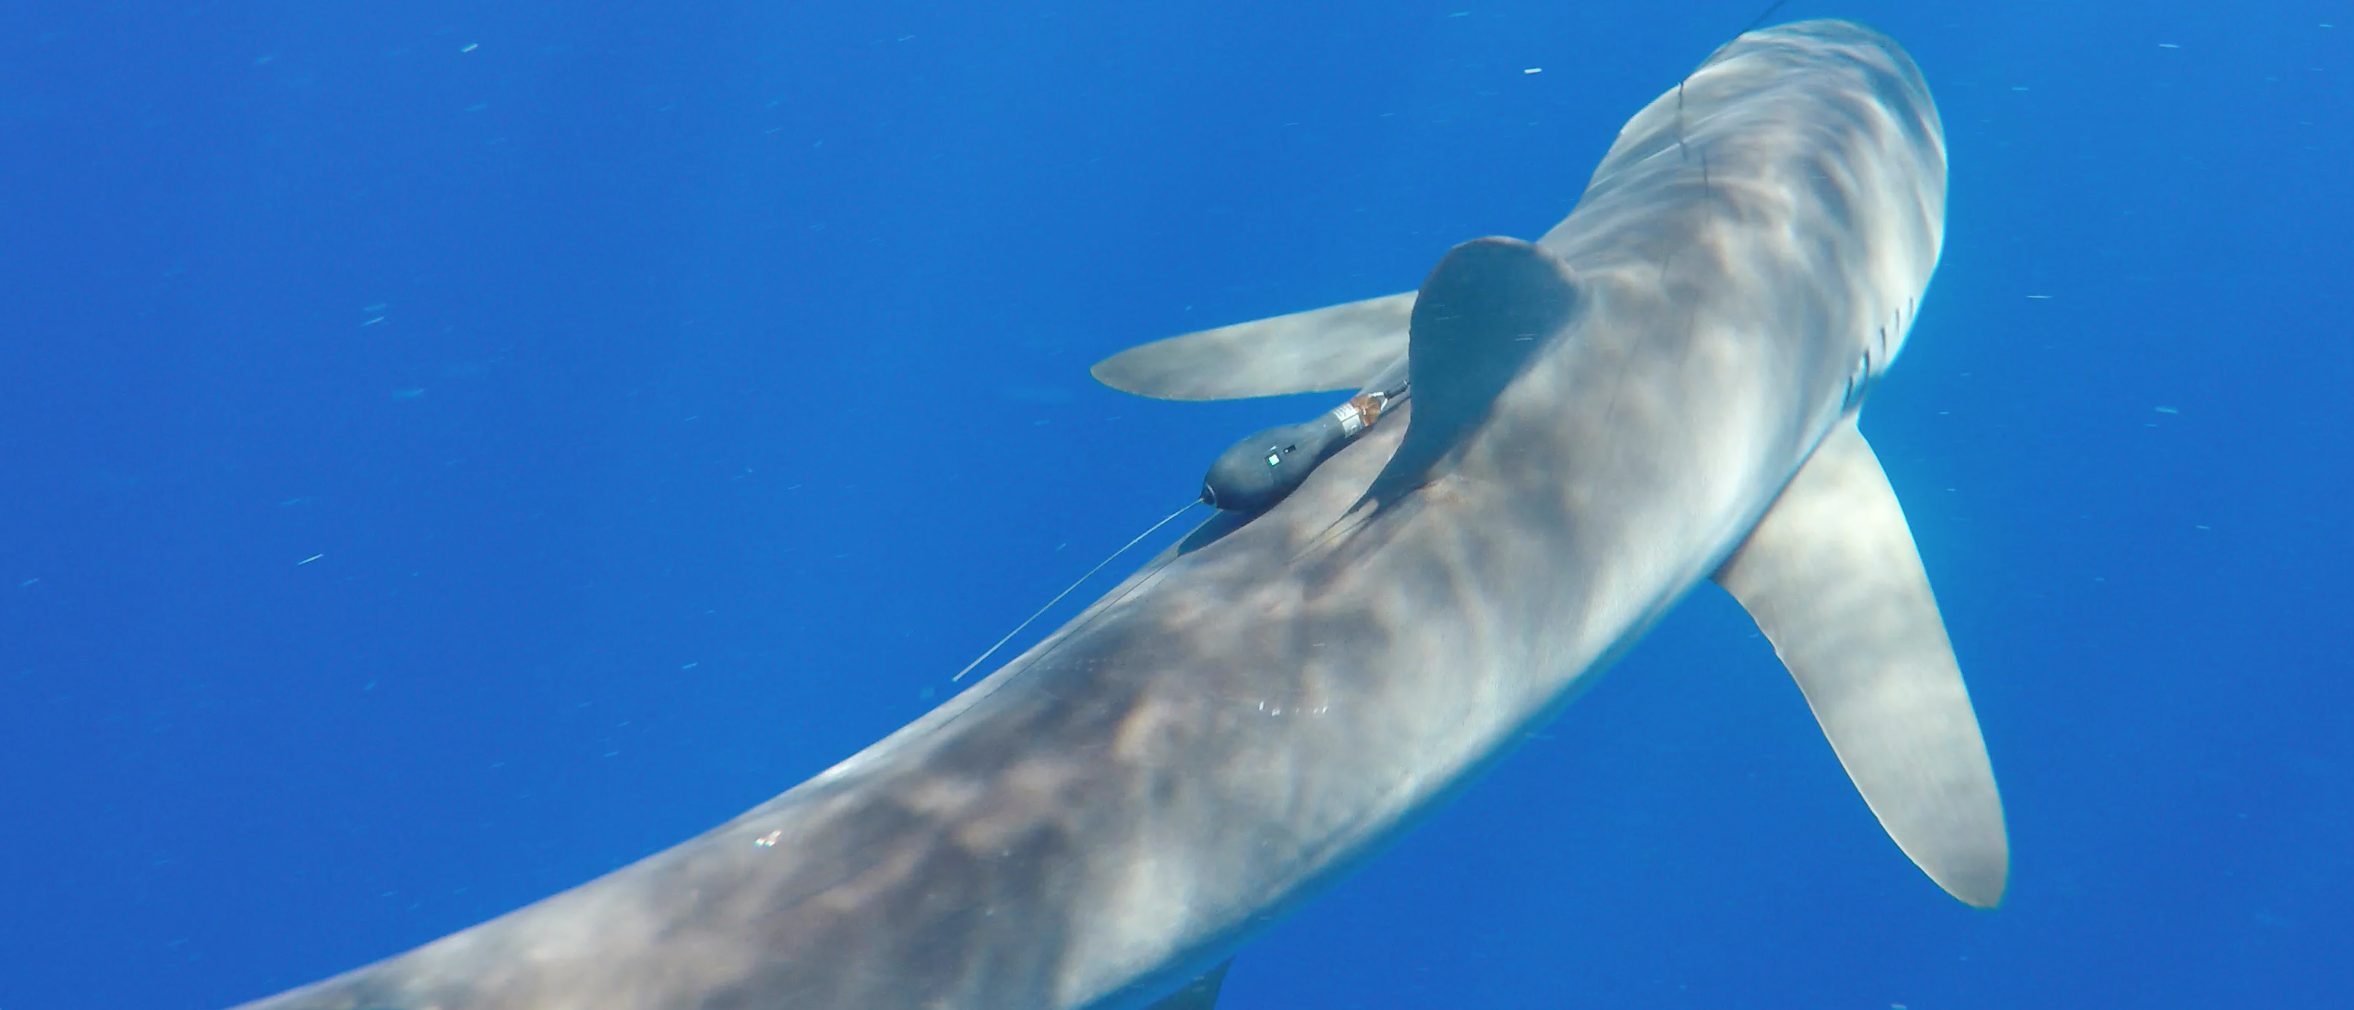 Understanding silky shark movement patterns to avoid interactions with fisheries